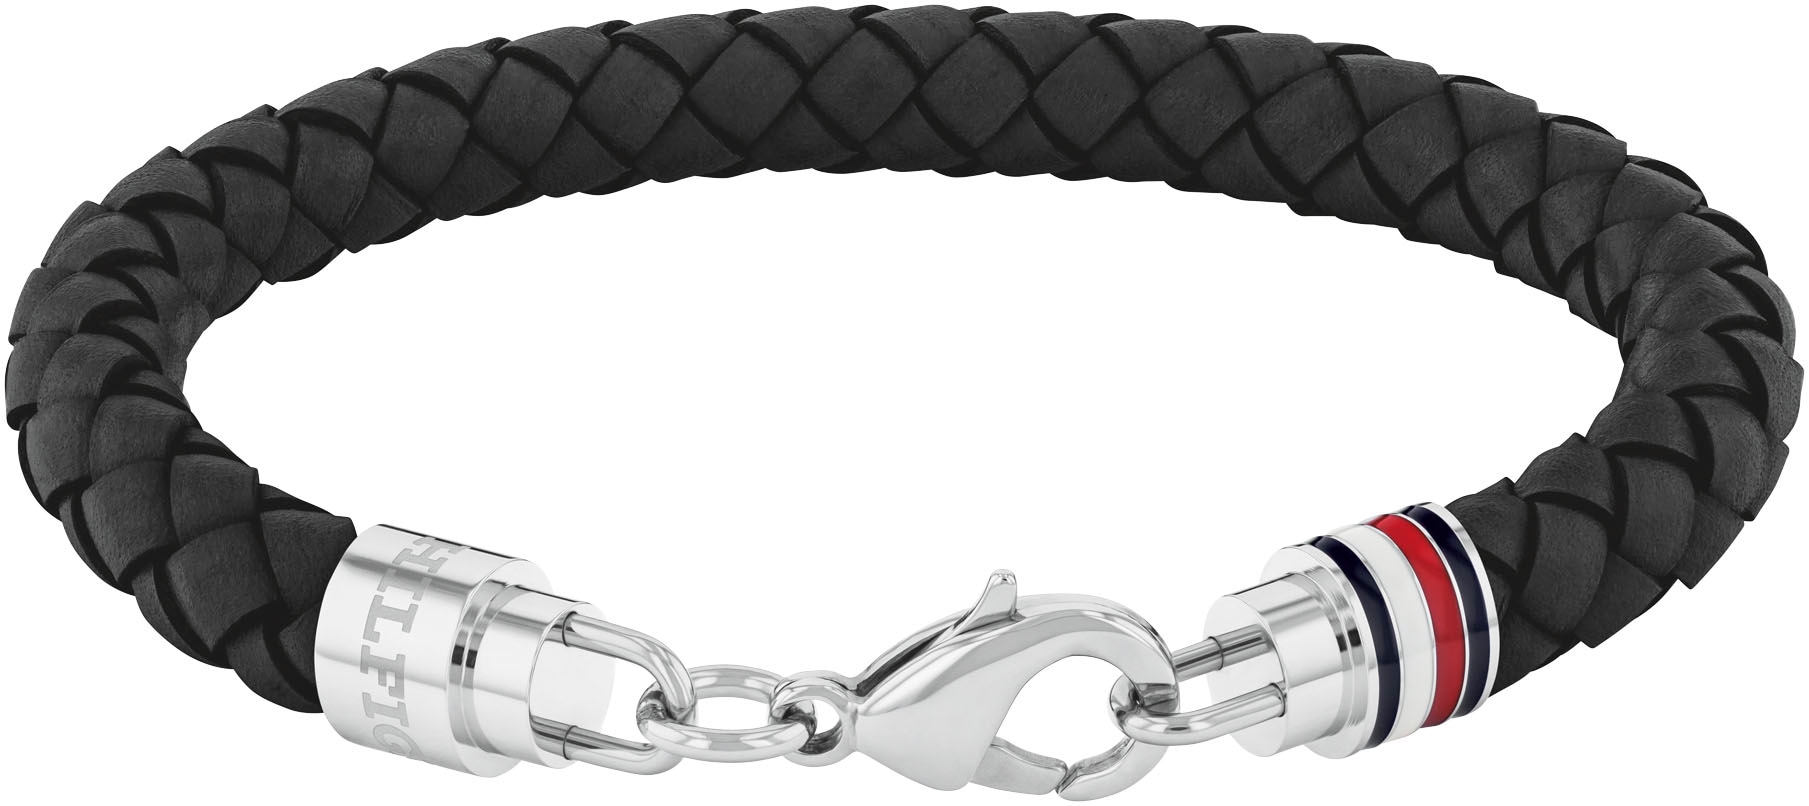 Tommy Hilfiger Lederarmband »ICONIC TH BRAIDED LEATHER, 2790545, 2790546«, mit Emaille